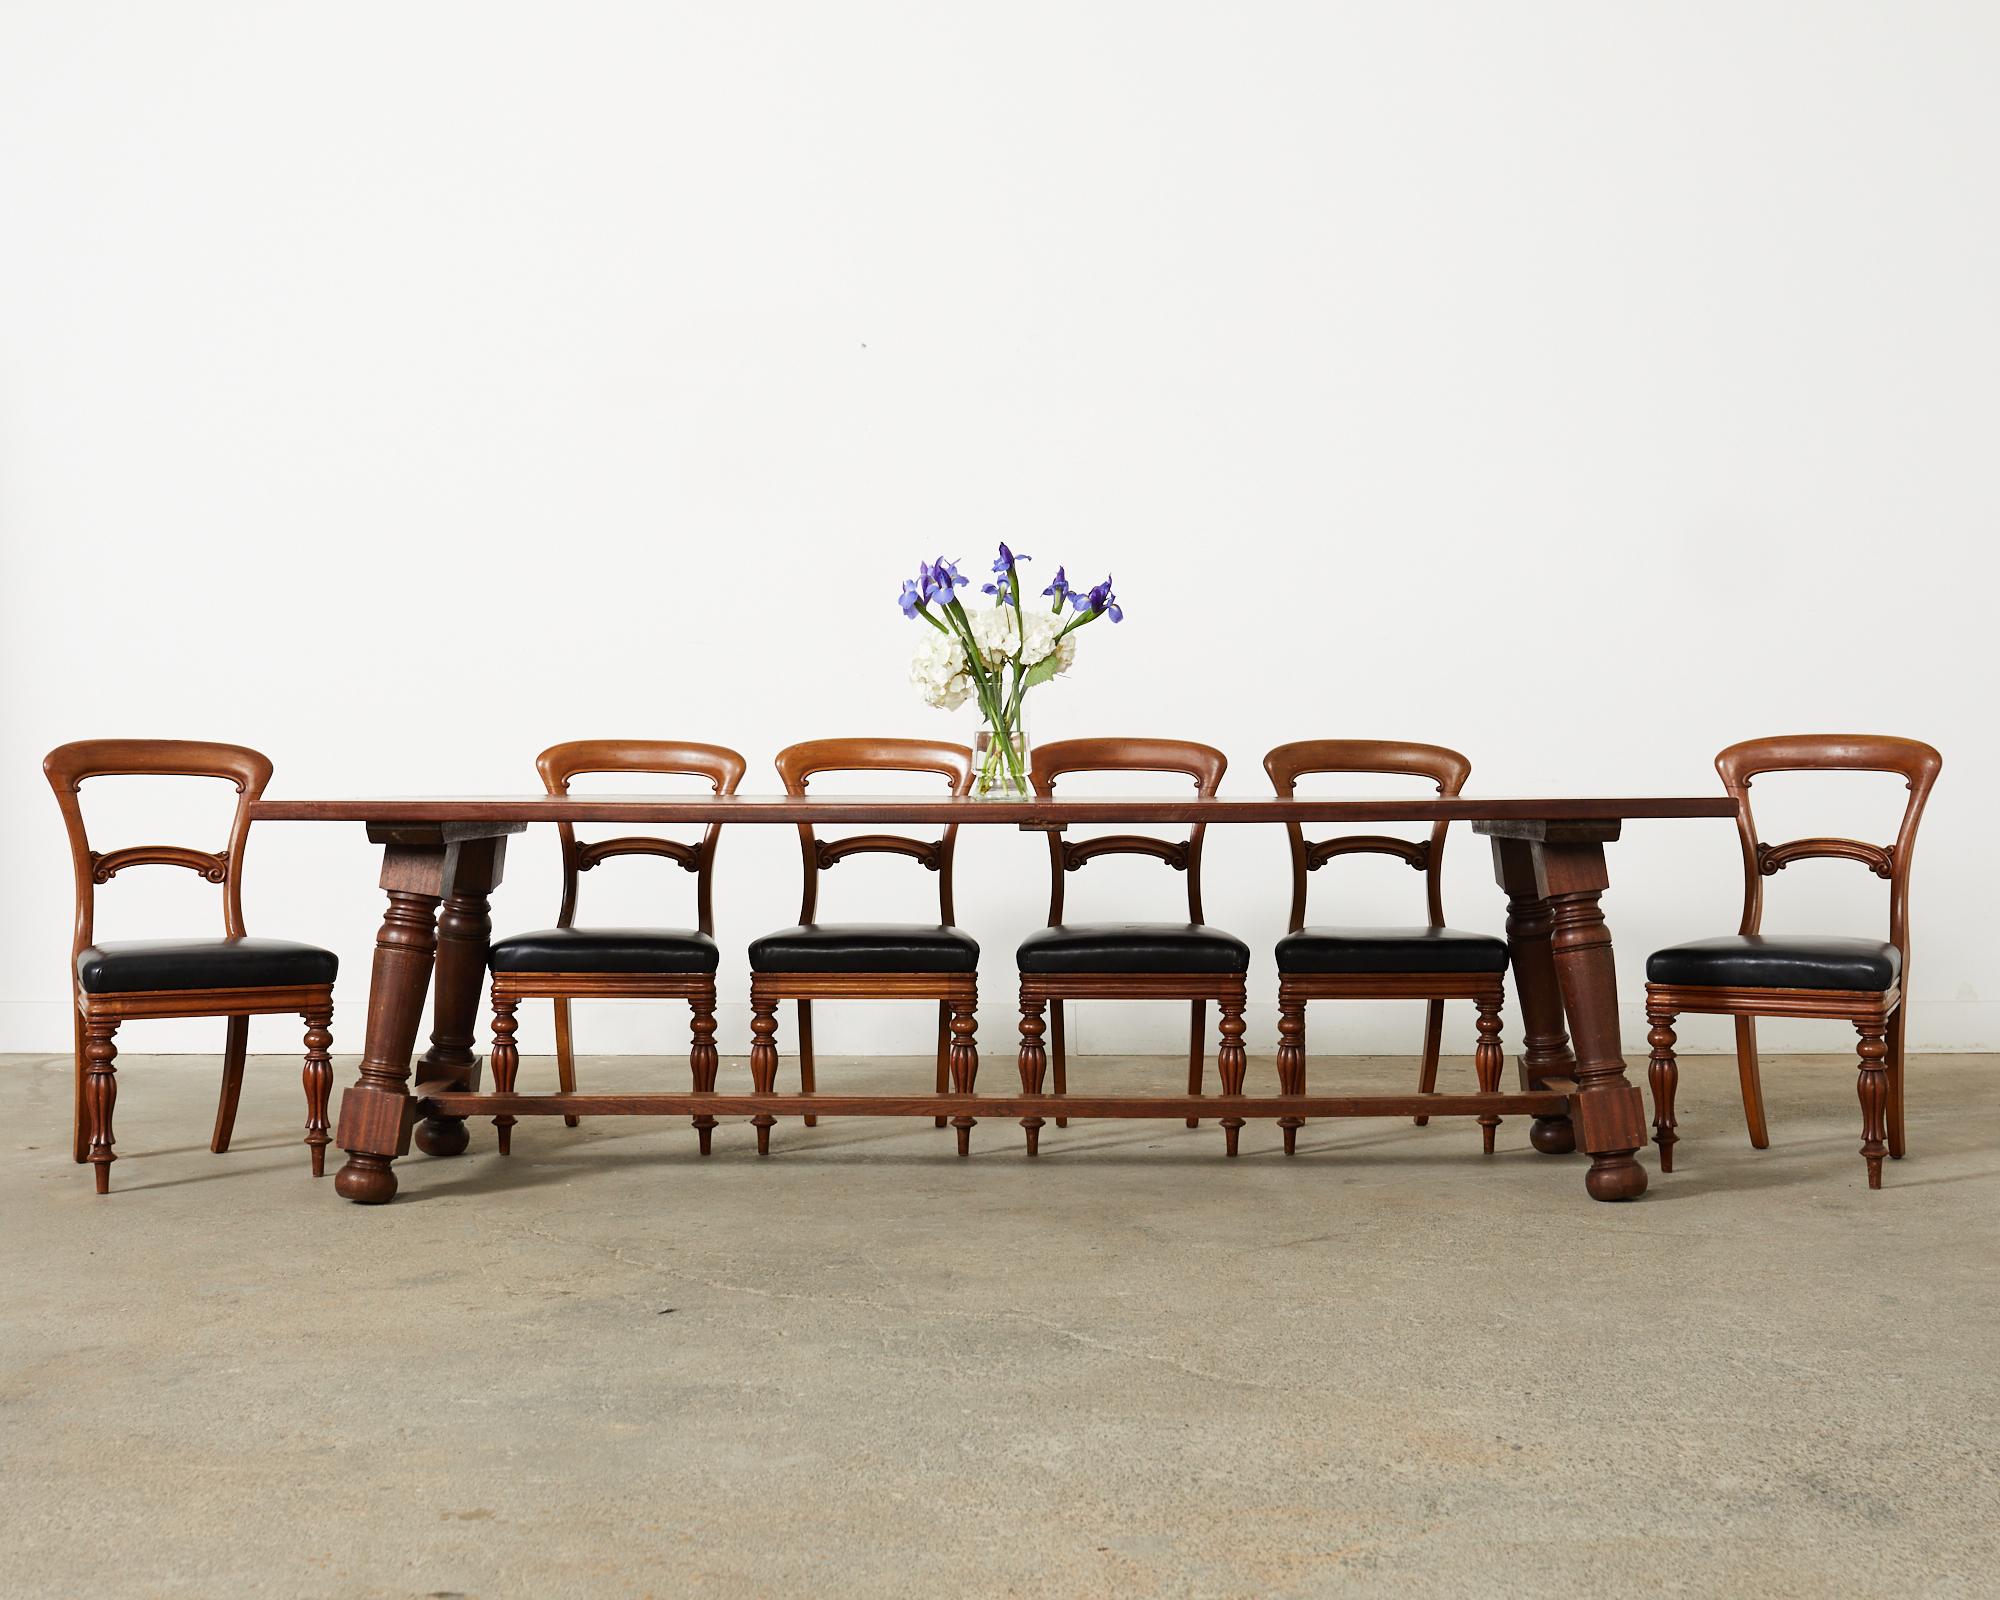 Grand set of twelve 19th century William IV dining chairs crafted from mahogany. The chairs feature a gracefully curved crestrail with a scrolled splat. The generous seats are covered with dramatic black leather hides. The chairs are supported by